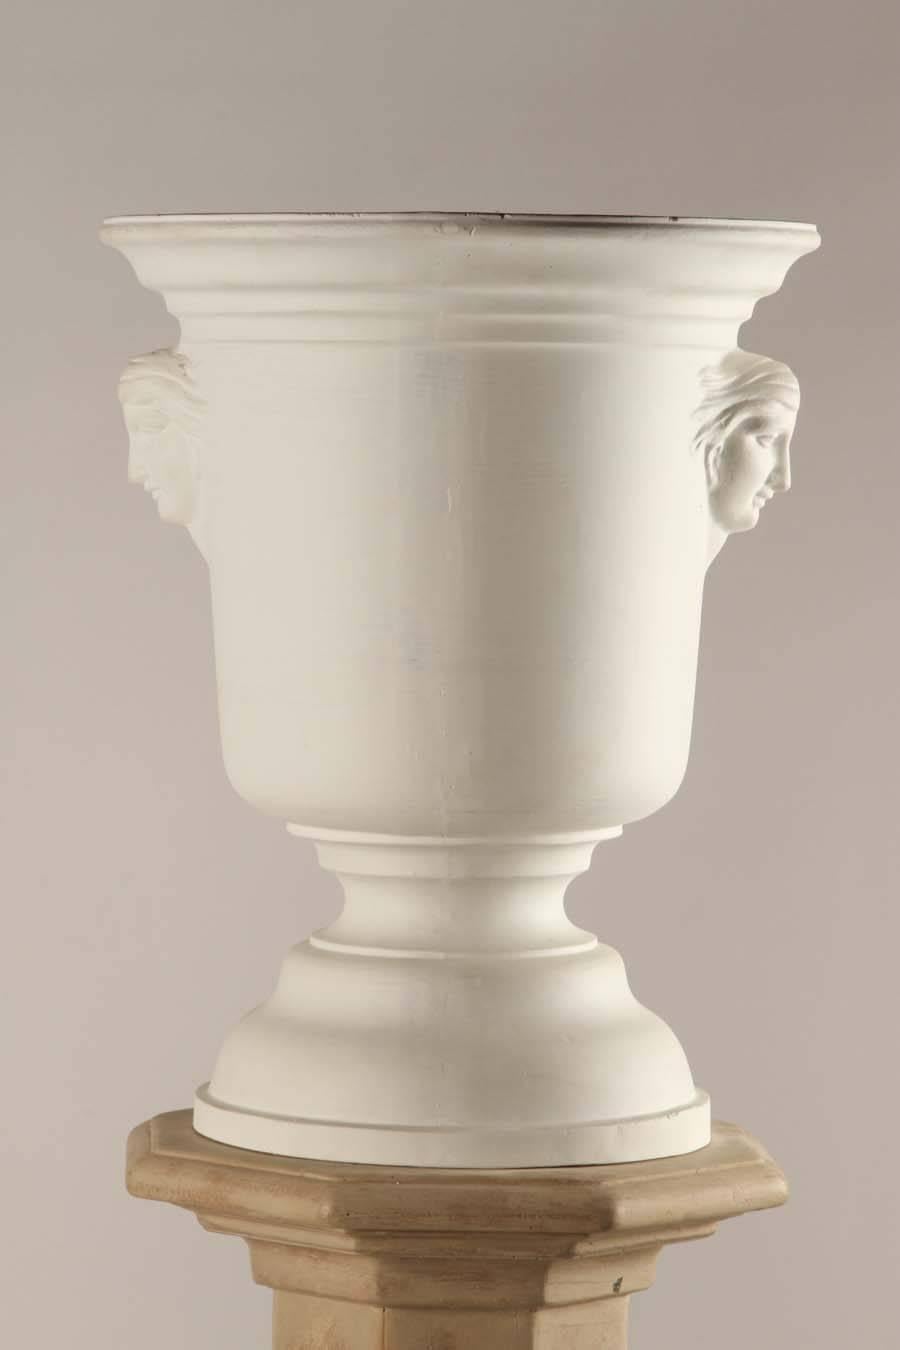 This is a pair of light fixtures in the form of urns set atop columns. Plaster urns on wood columns.
Standard sockets.